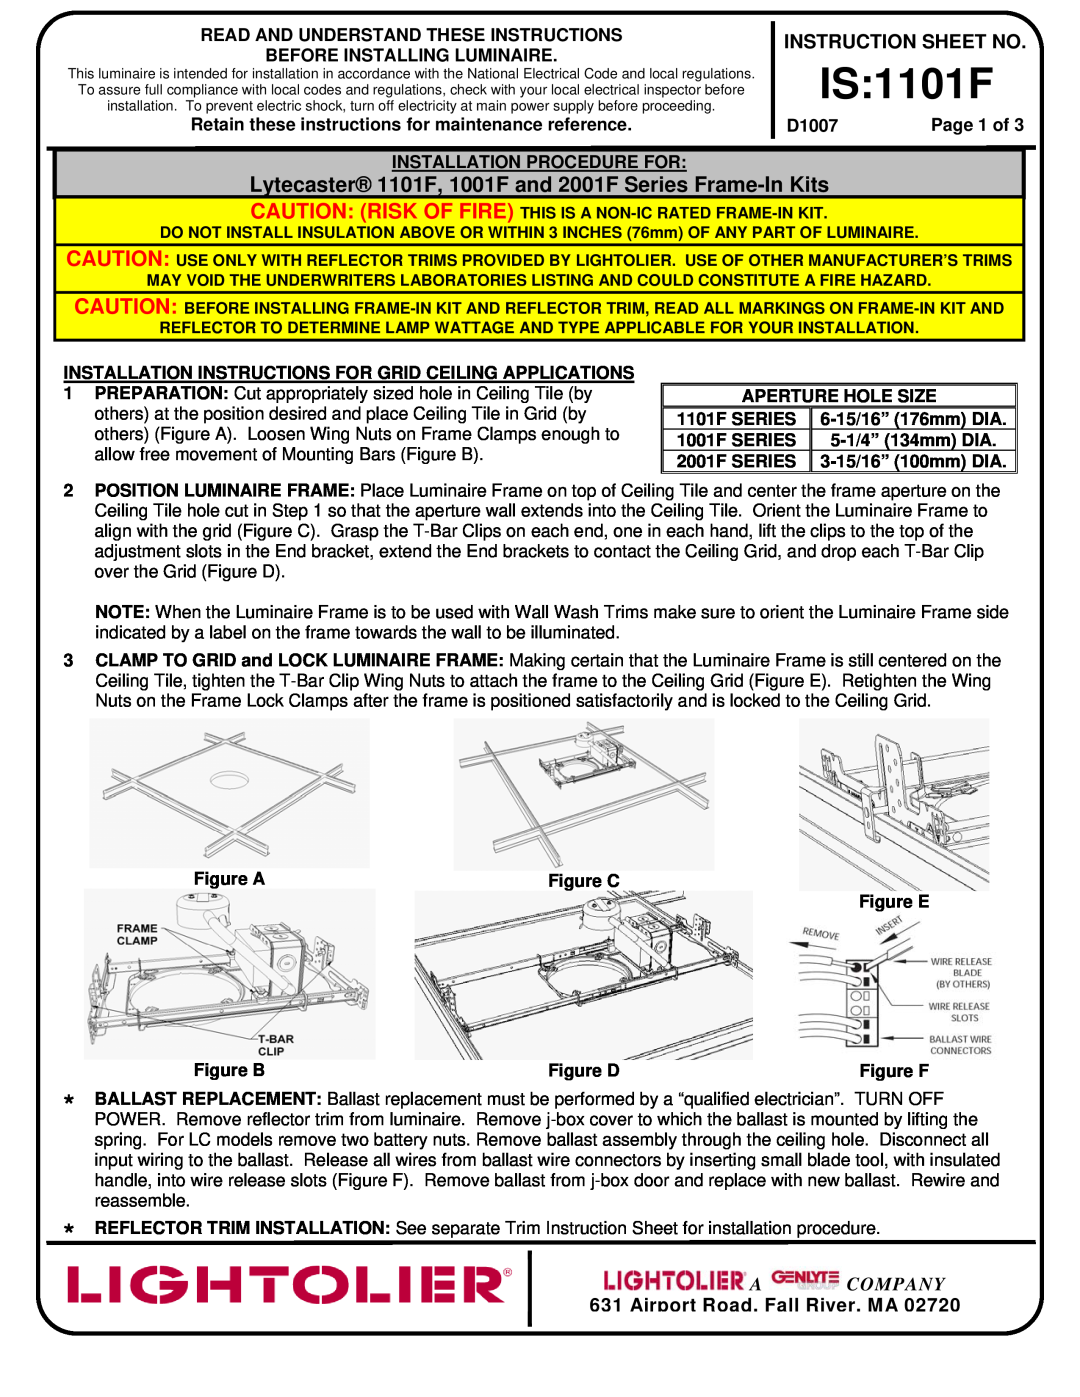 Lightolier 2001F Series installation instructions IS 1101F, Instruction Sheet No, A Company, Airport Road, Fall River, MA 